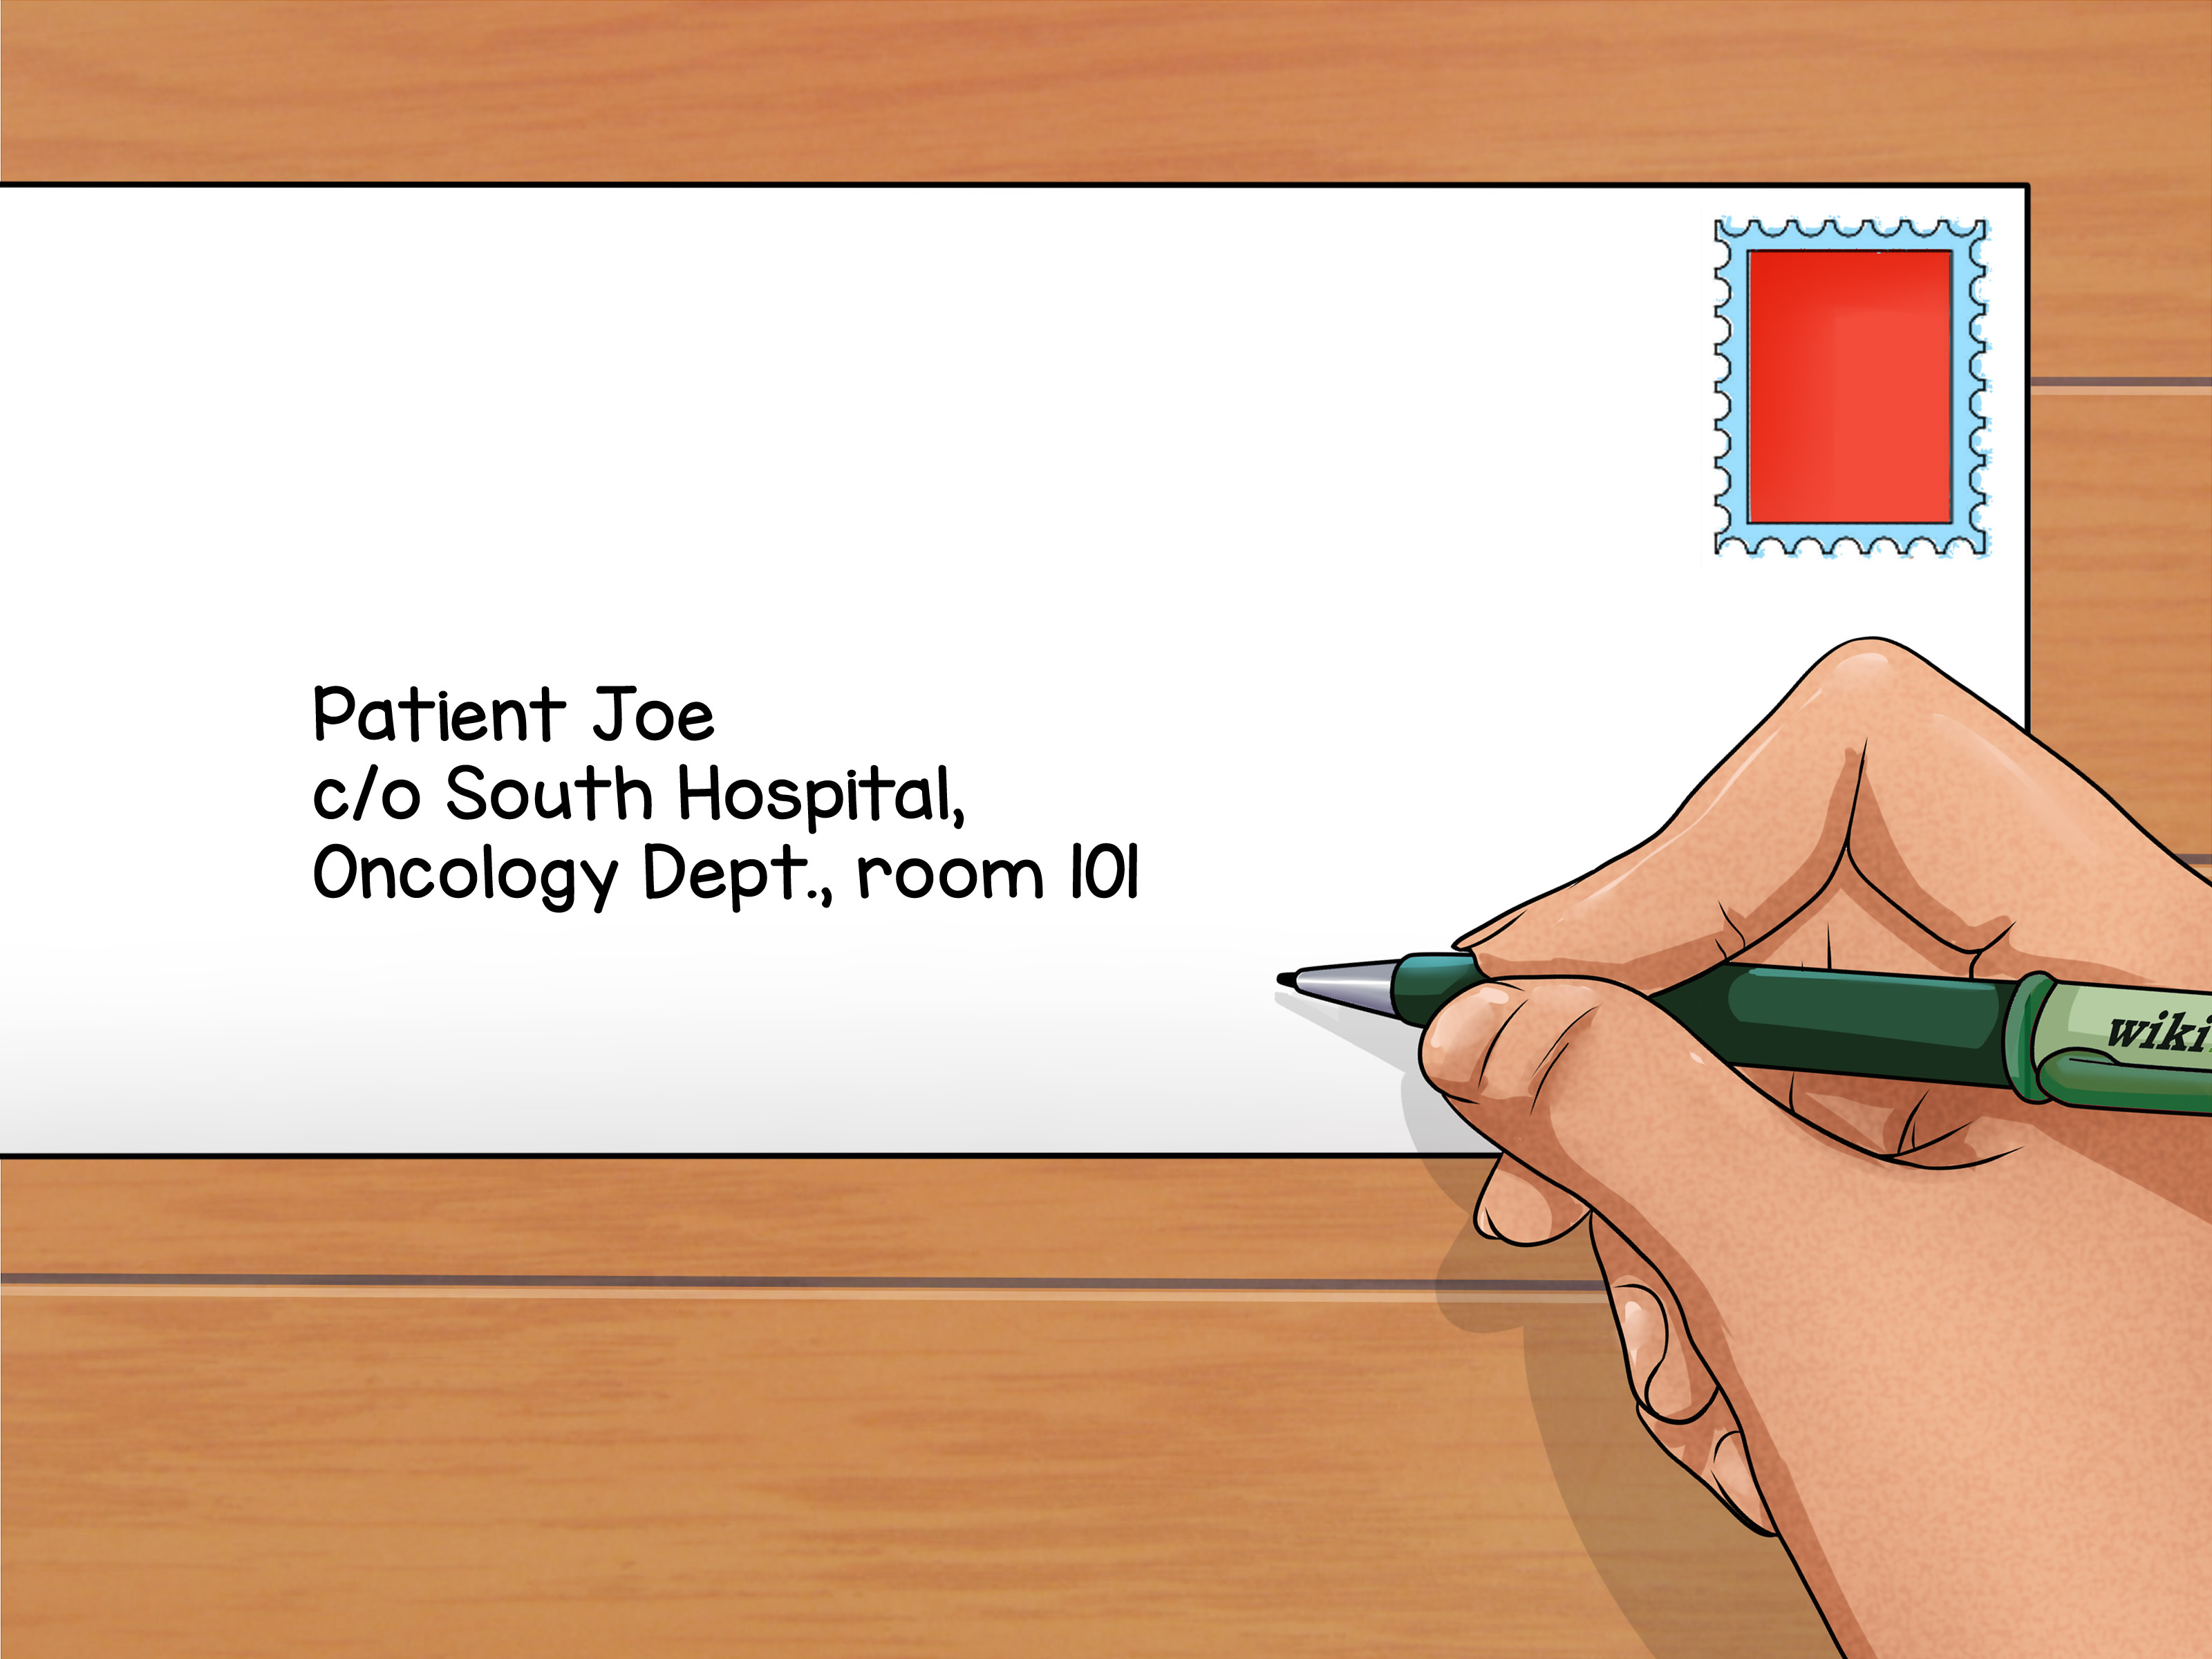 Can You Send Packages To Hospital Patients? – excel-medical.com